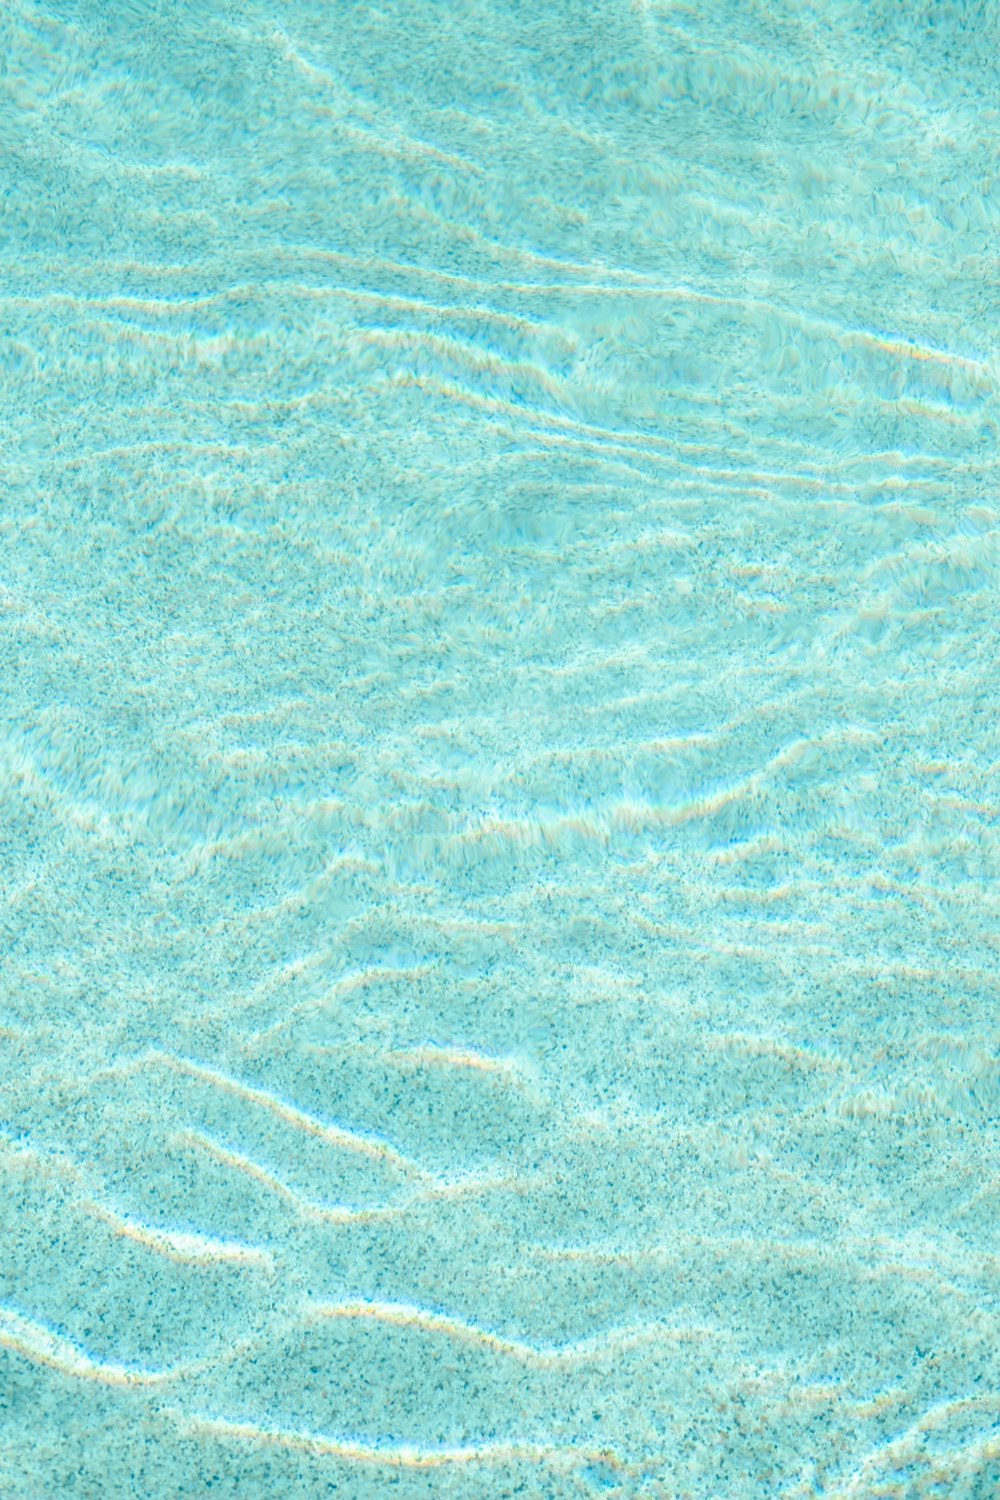 a blue pool with clear water and ripples